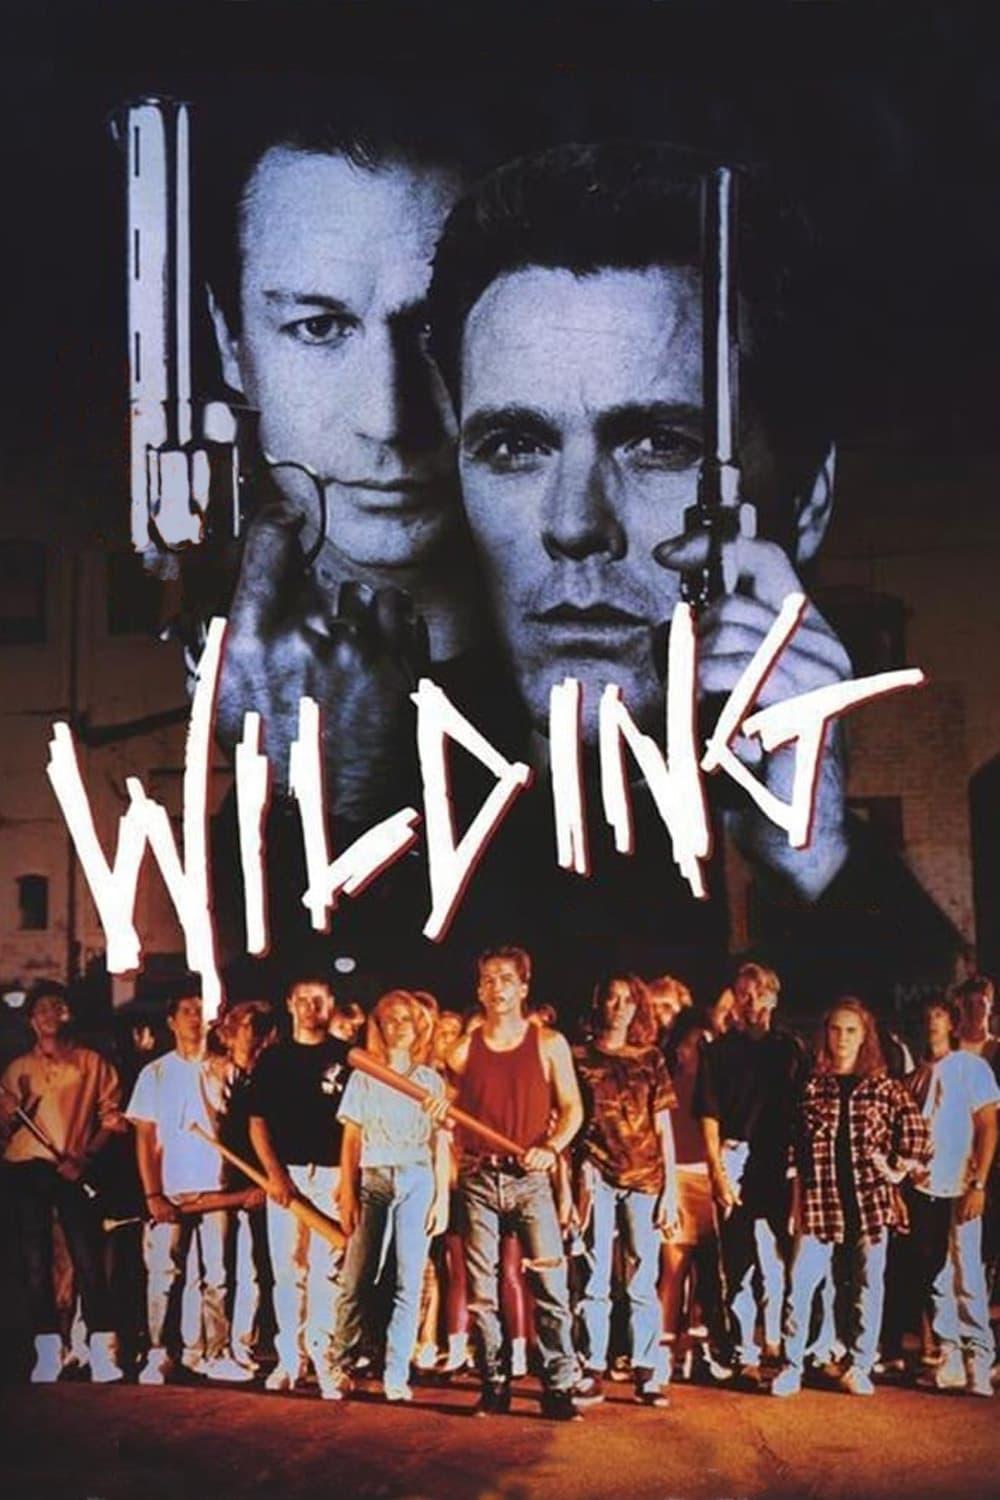 Wilding poster